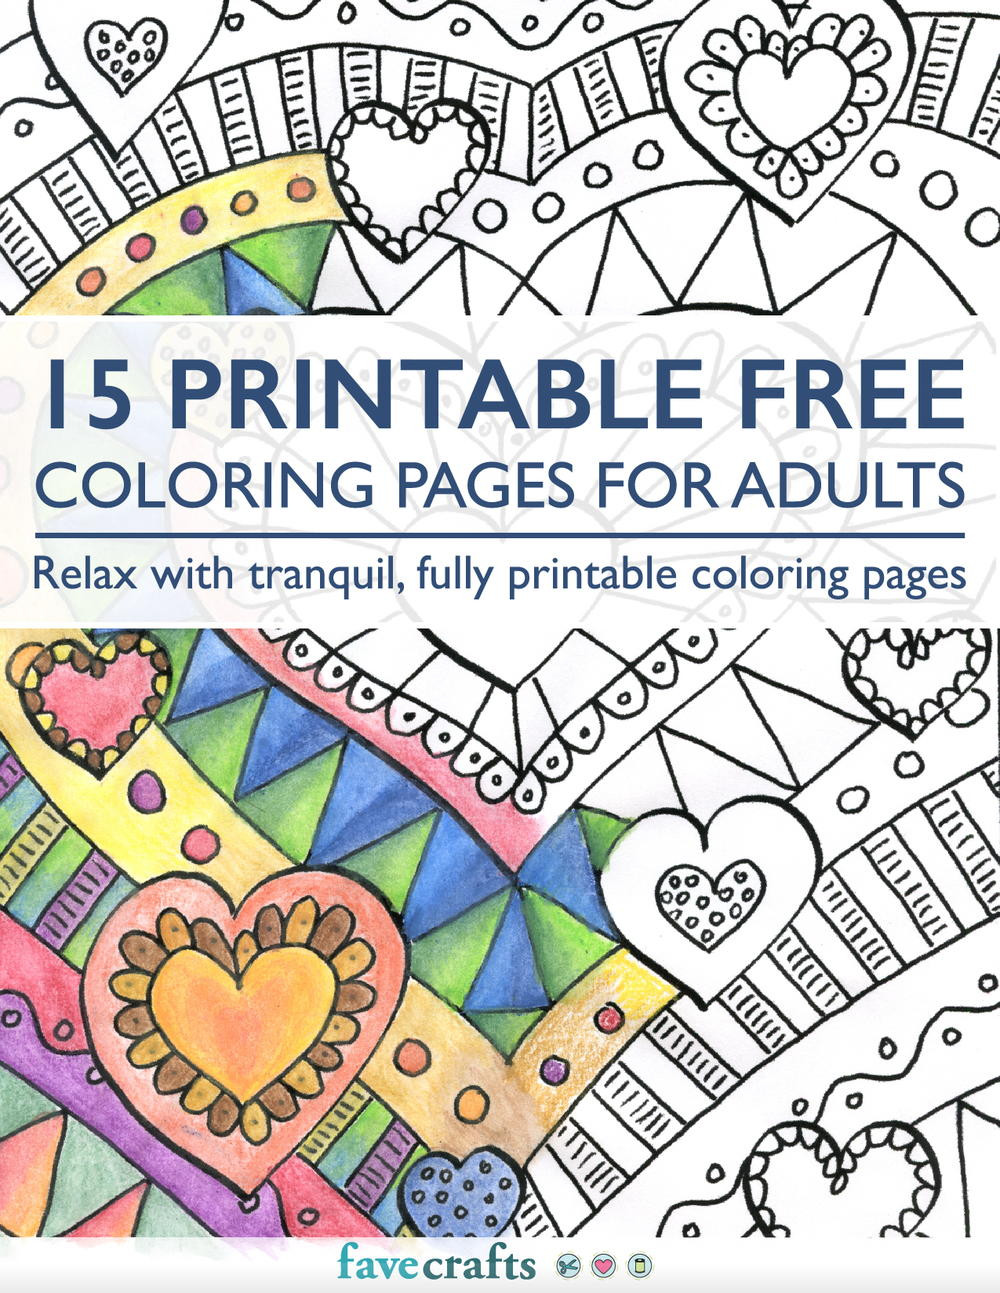 Large Adult Coloring Book
 15 Printable Free Coloring Pages for Adults [PDF